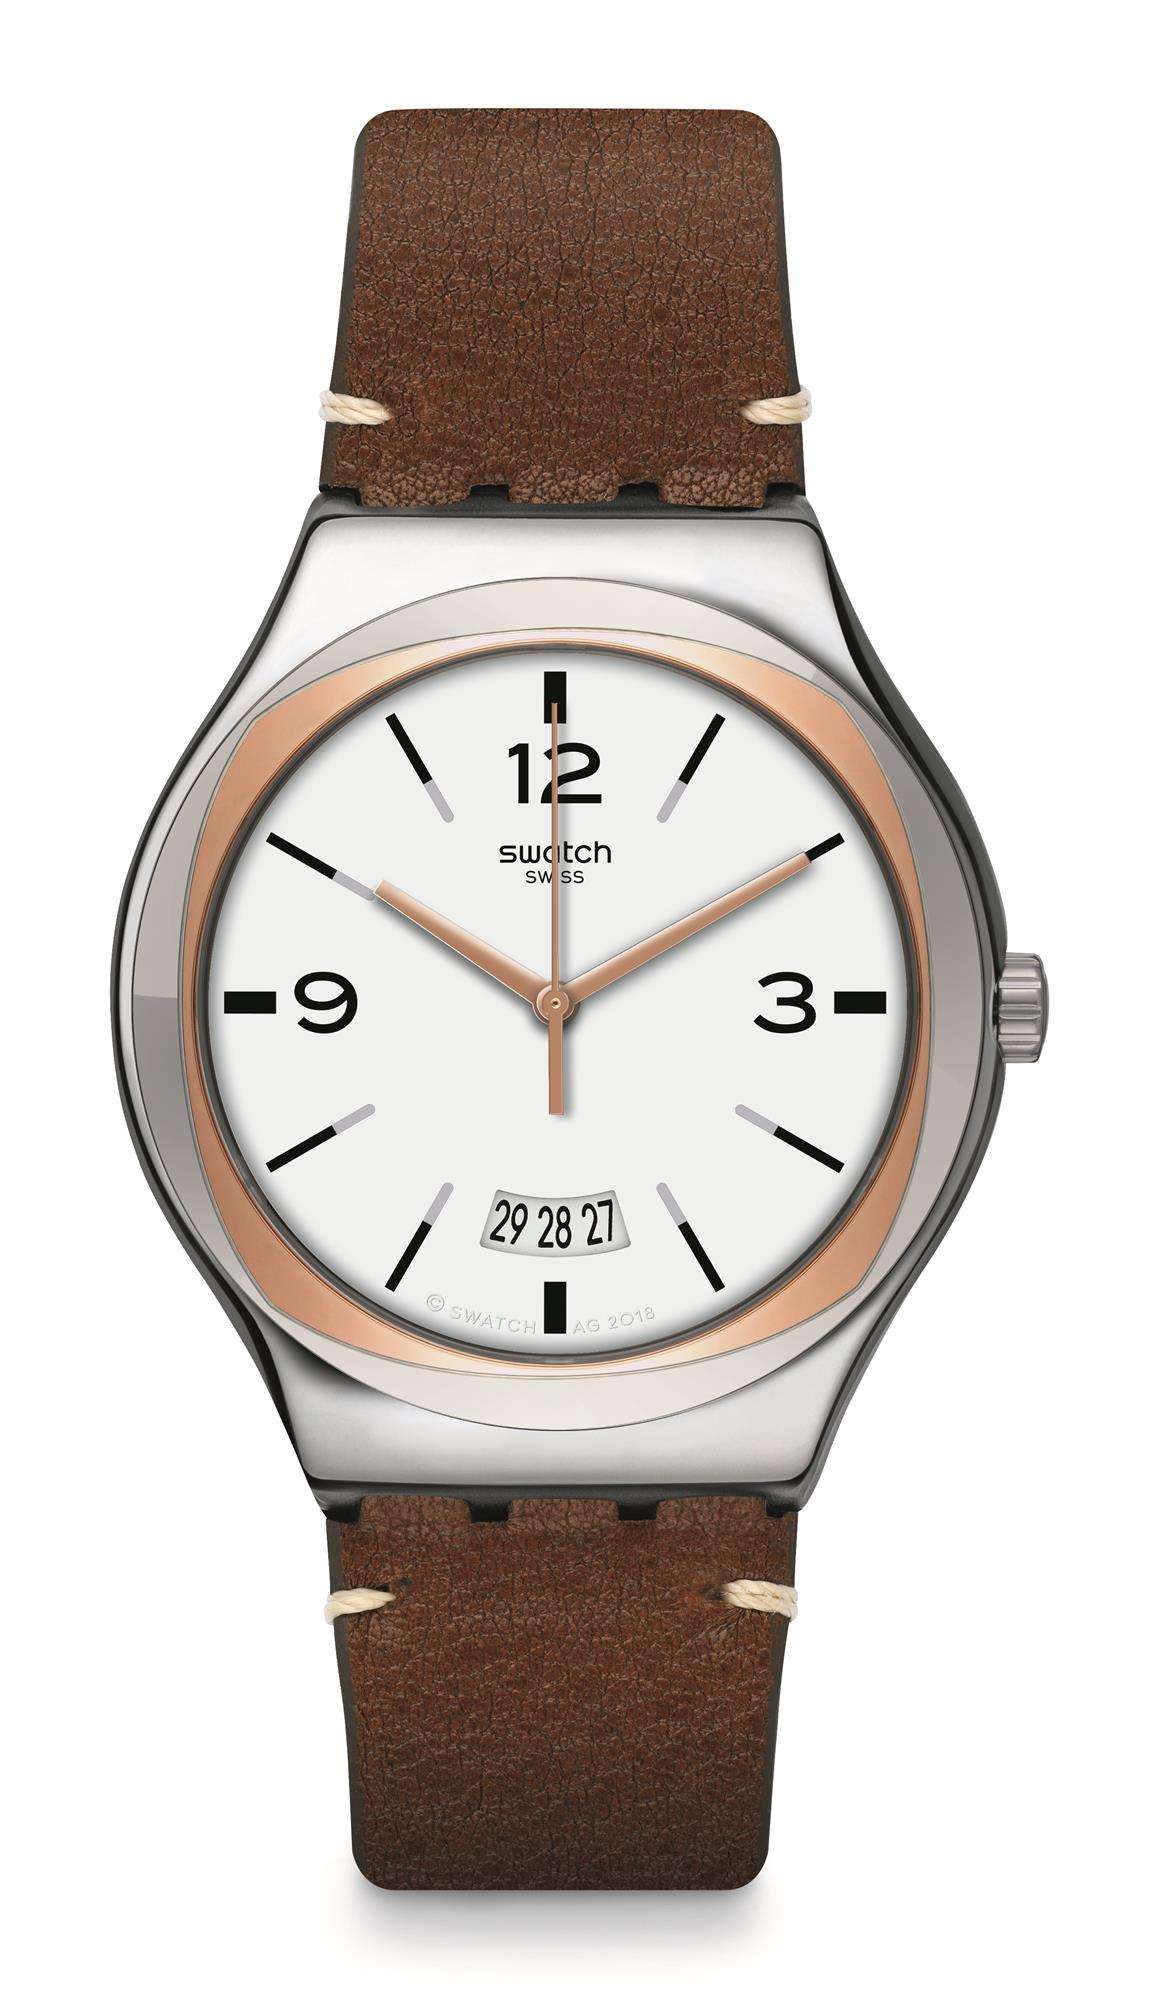 Swatch Irony TV Show Brown Leather Strap White Dial Mens Watch YWS443 42.7mm